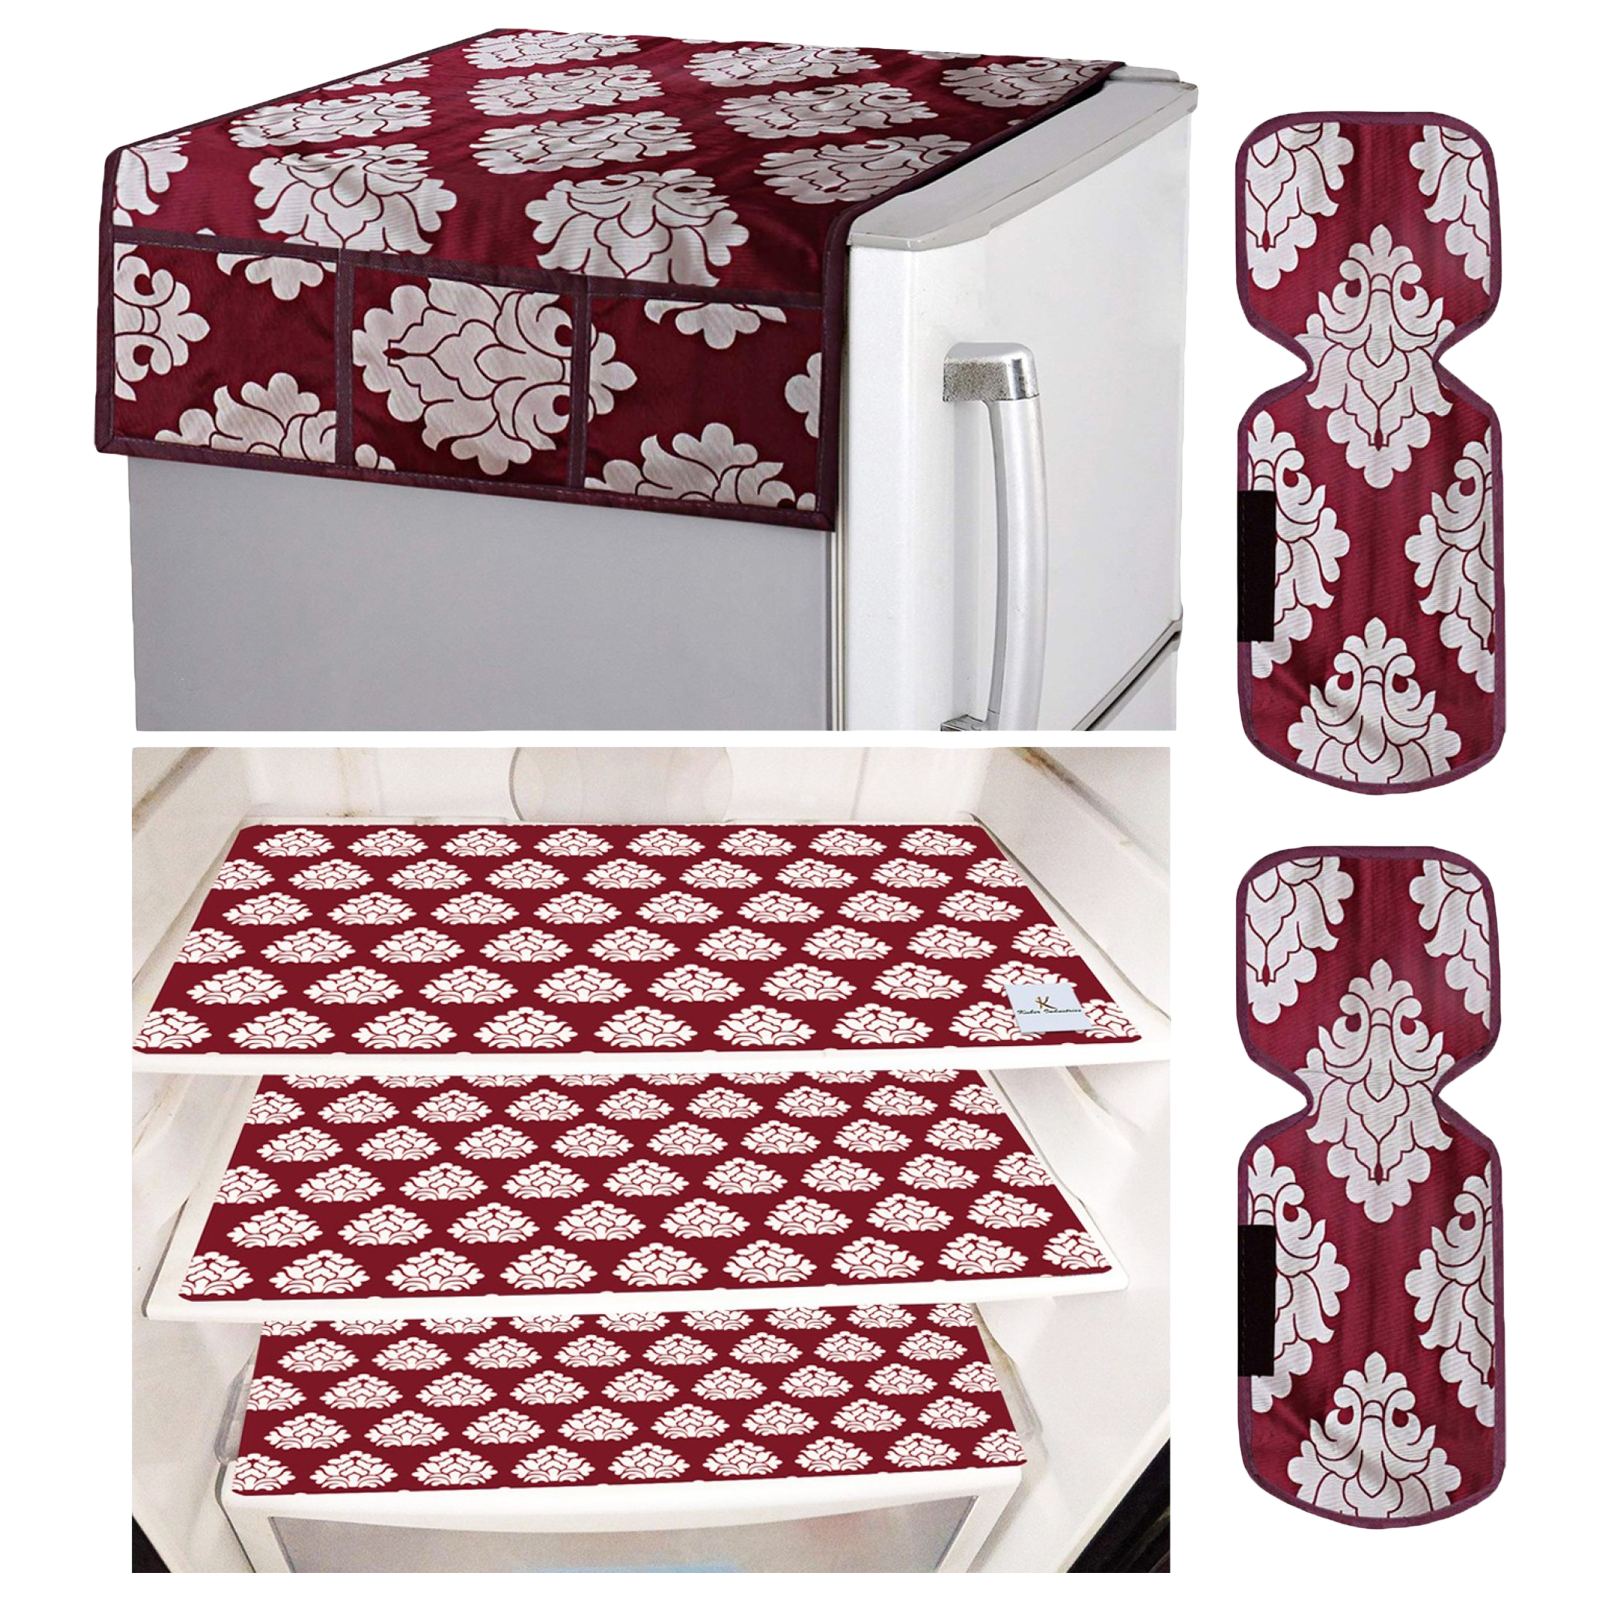 

Kuber Industries Mat For Refrigerator (Easily Hand Washable, CTKTC033659, Maroon), No color